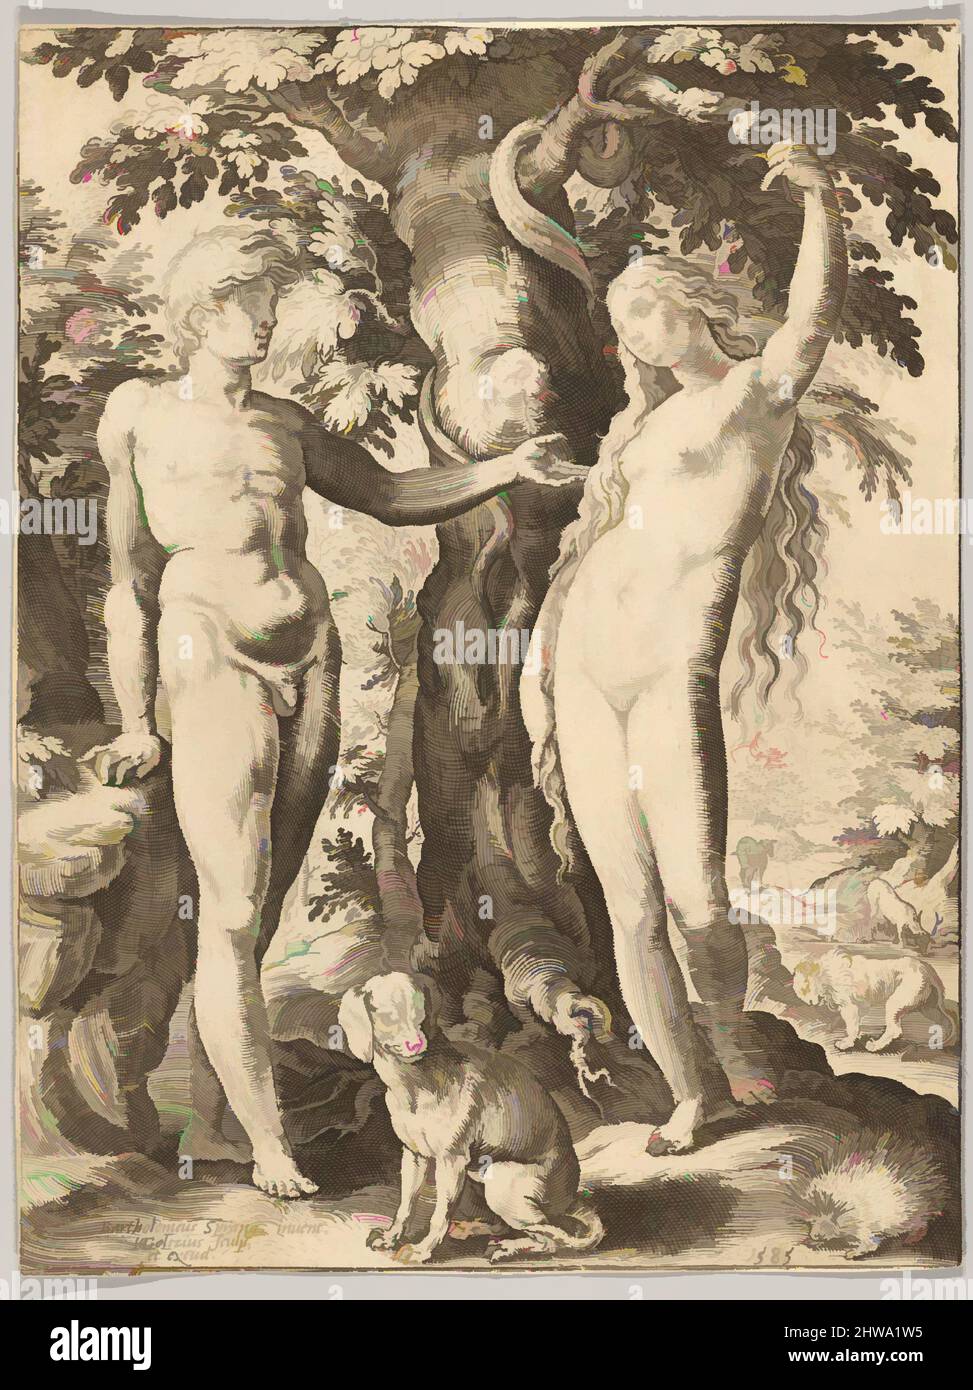 Art inspired by Drawings and Prints, Print, Adam and Eve, Artist, After, Hendrick Goltzius, Bartholomeus Spranger, Netherlandish, Mühlbracht, Classic works modernized by Artotop with a splash of modernity. Shapes, color and value, eye-catching visual impact on art. Emotions through freedom of artworks in a contemporary way. A timeless message pursuing a wildly creative new direction. Artists turning to the digital medium and creating the Artotop NFT Stock Photo